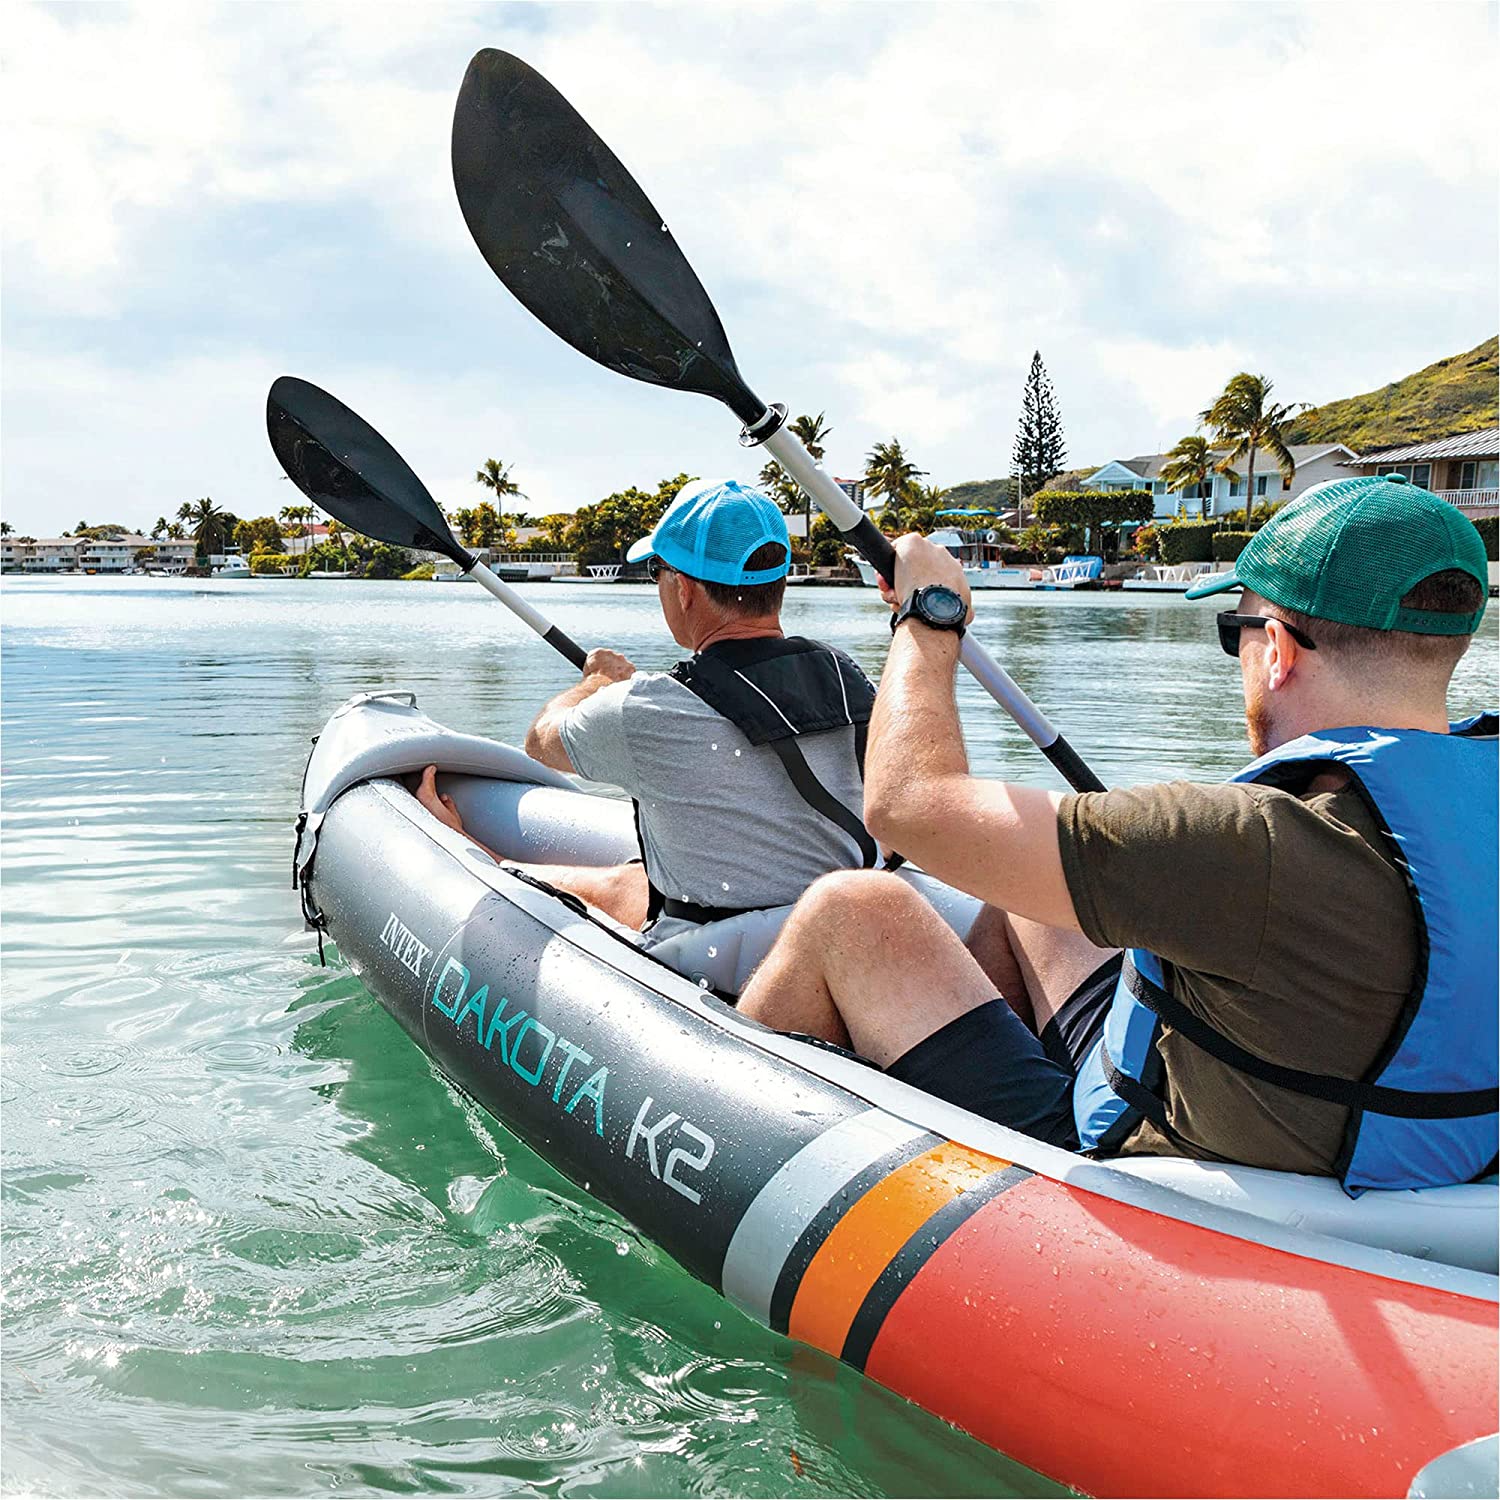 2-Person Heavy-Duty Inflatable Kayak